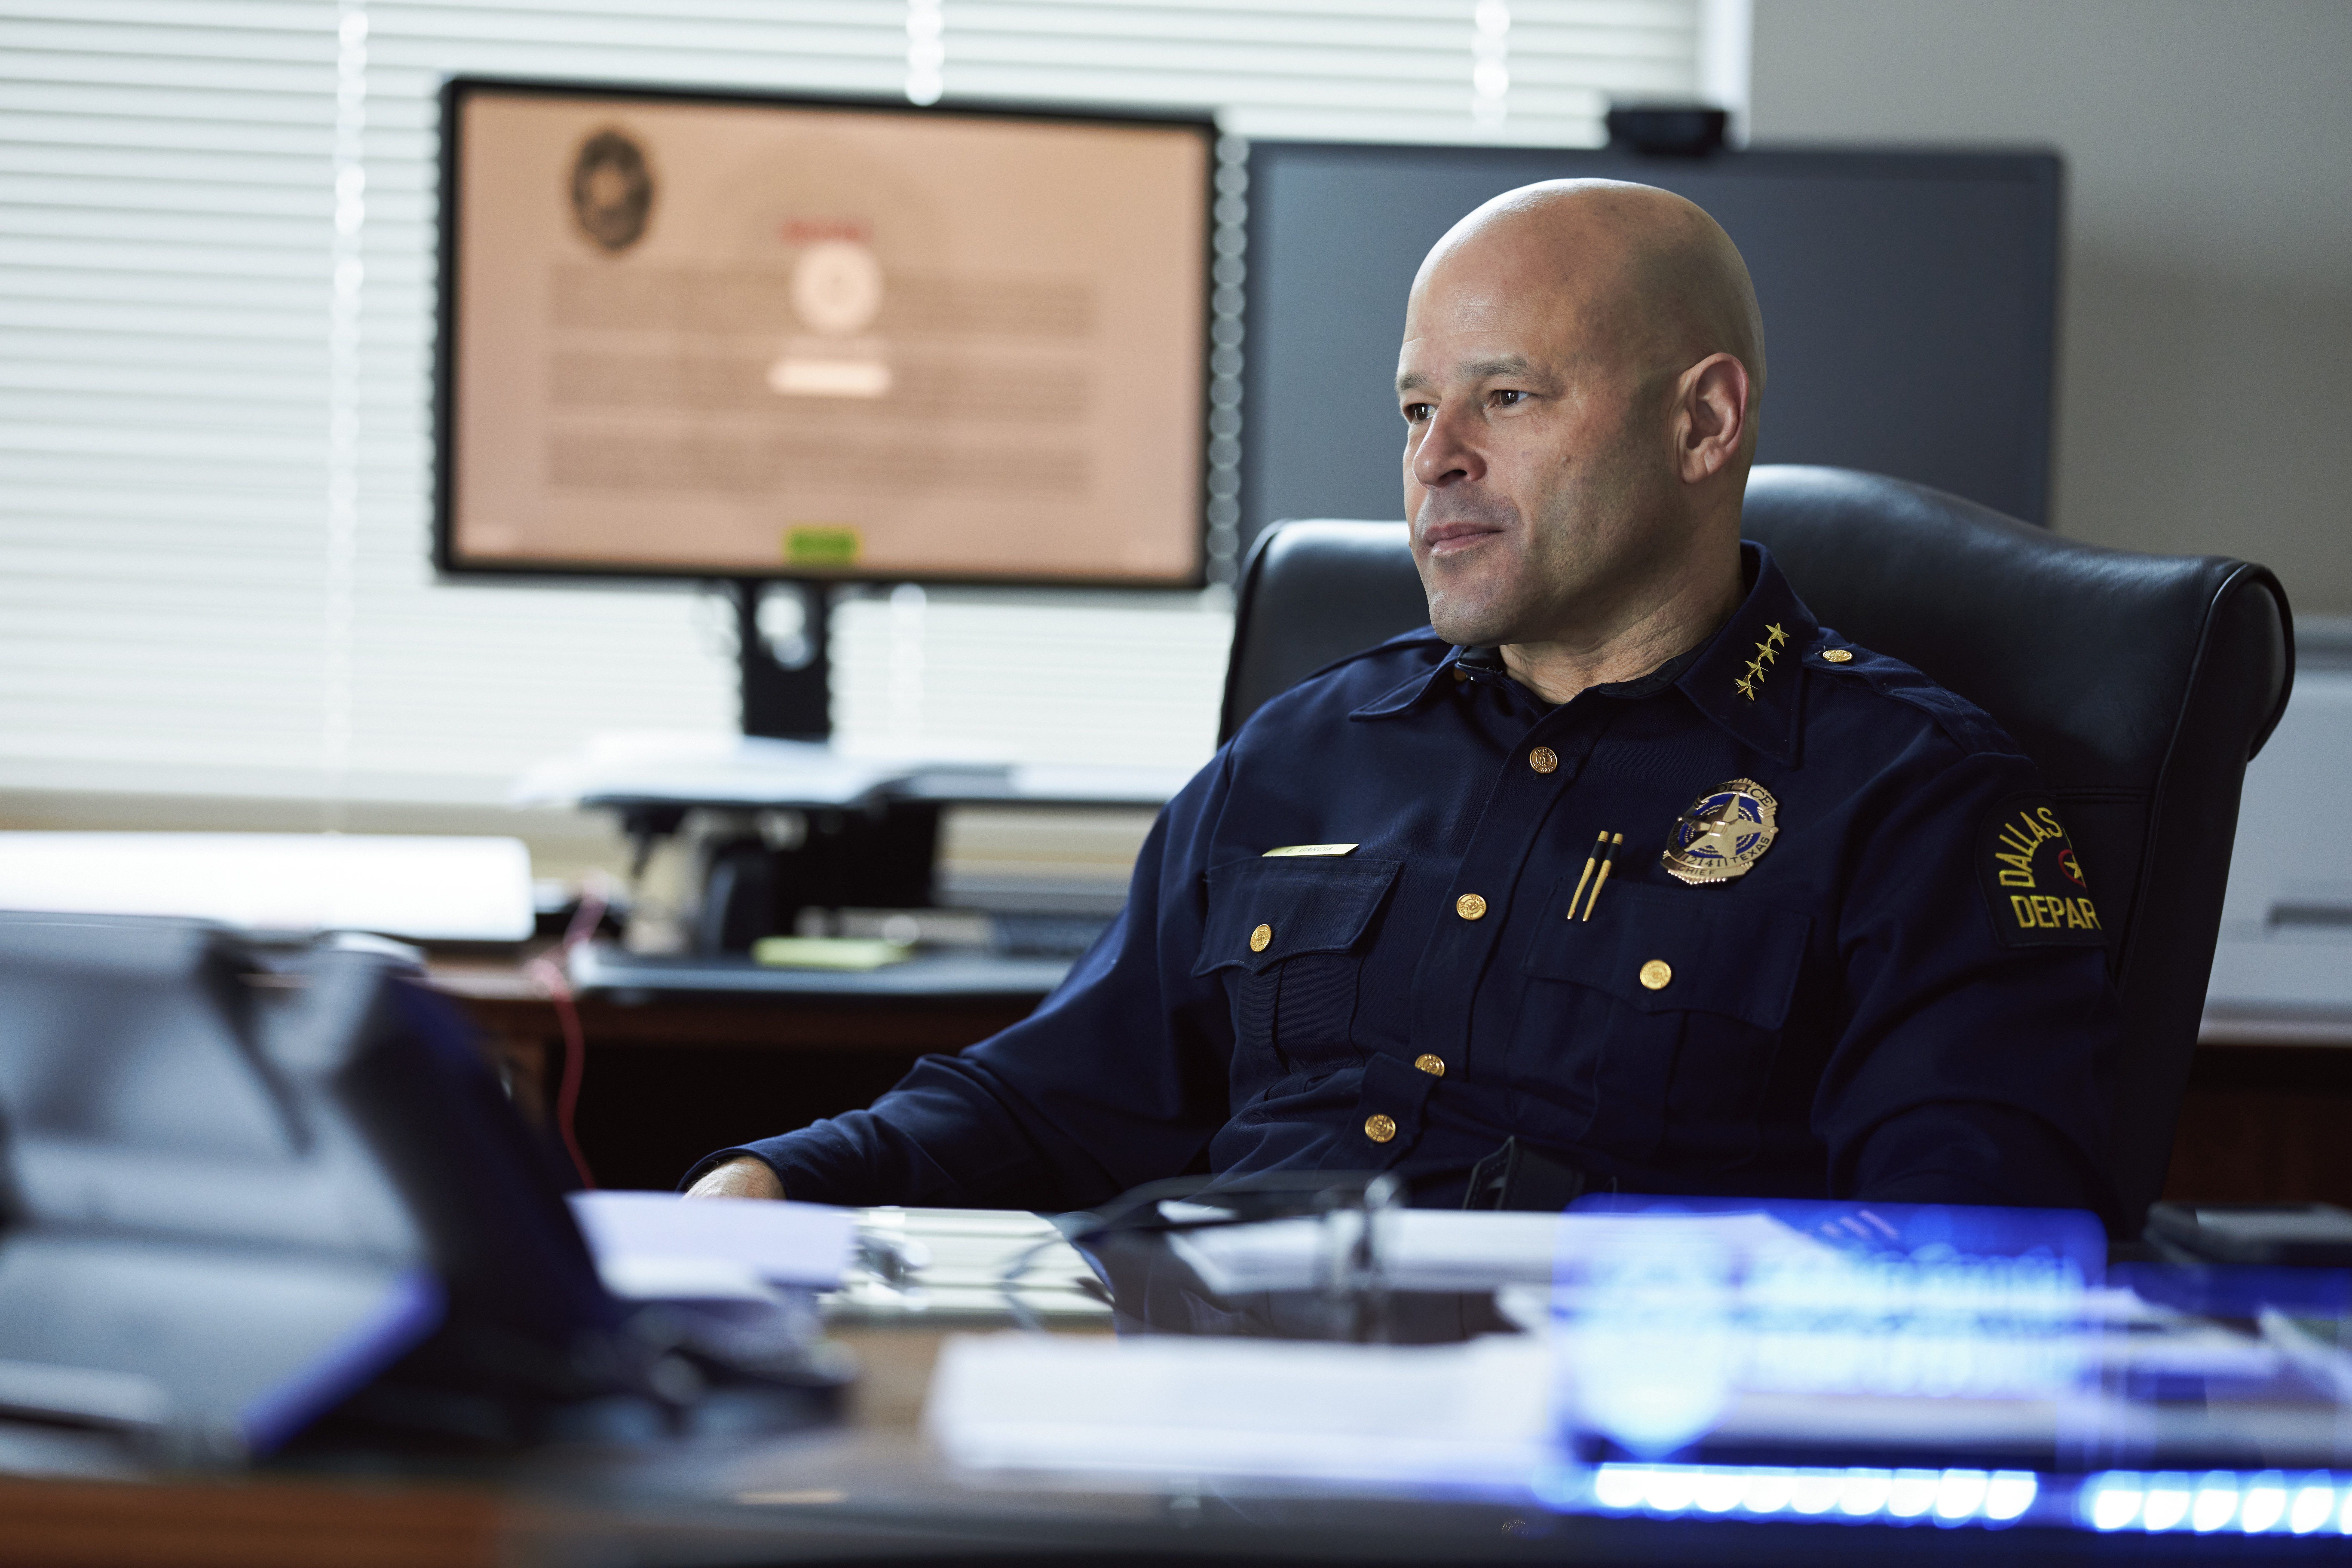 Chief Eddie Garcia, wearing a navy police uniform, sits at his desk with multiple computer monitors in the background.